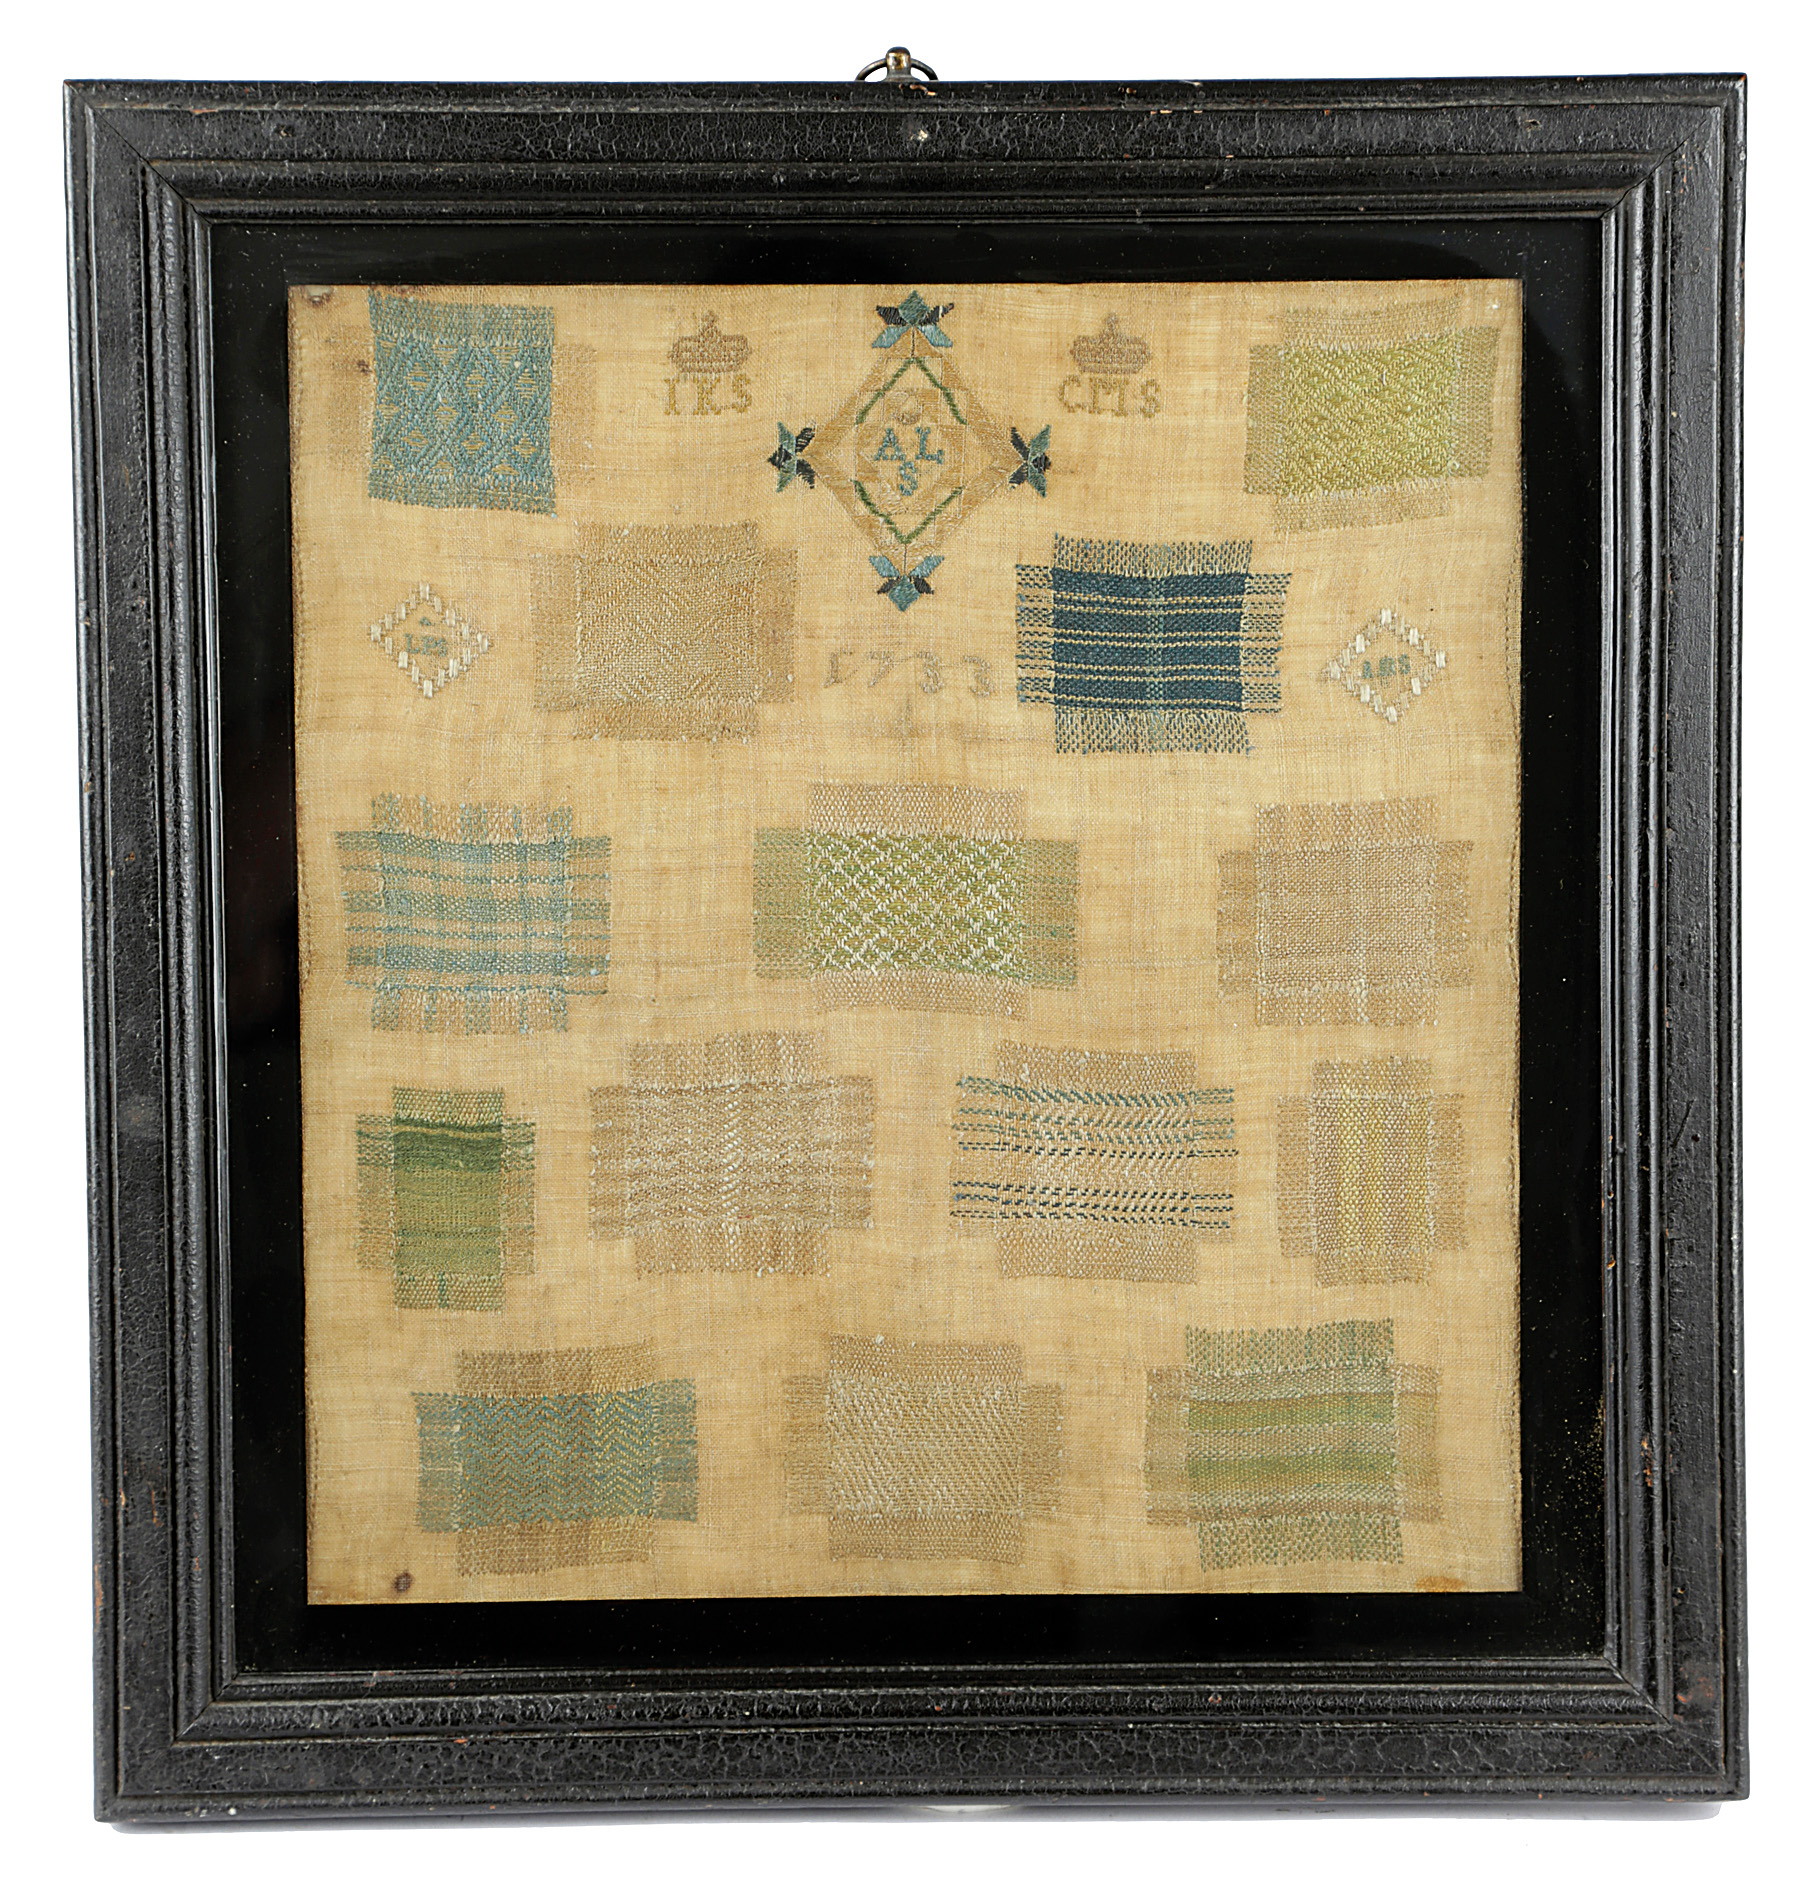 A NORTH EUROPEAN NEEDLEWORK DARNING SAMPLER DATED 1733 worked with fourteen large darns, signed with